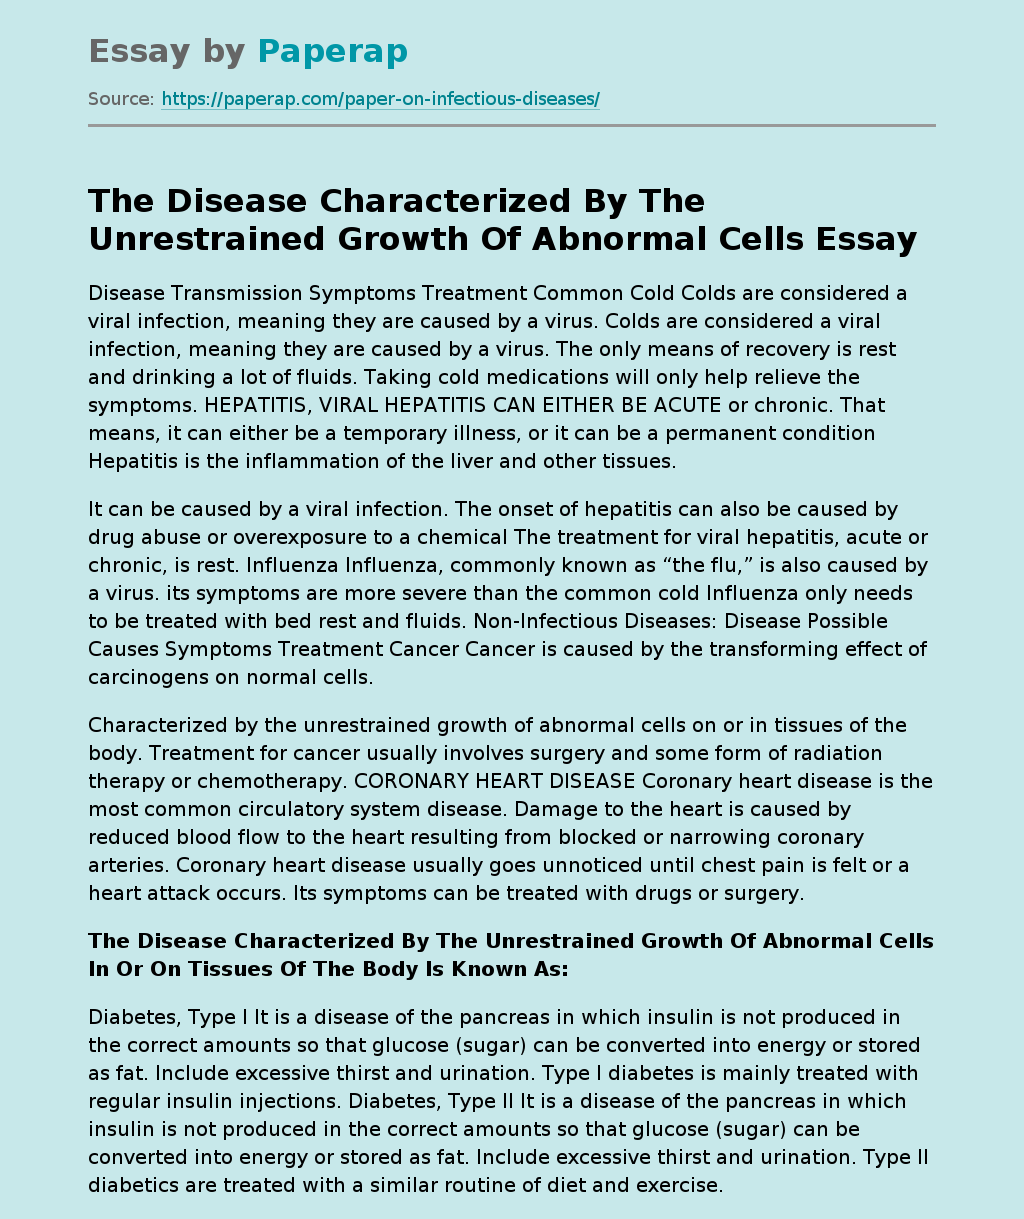 The Disease Characterized By The Unrestrained Growth Of Abnormal Cells